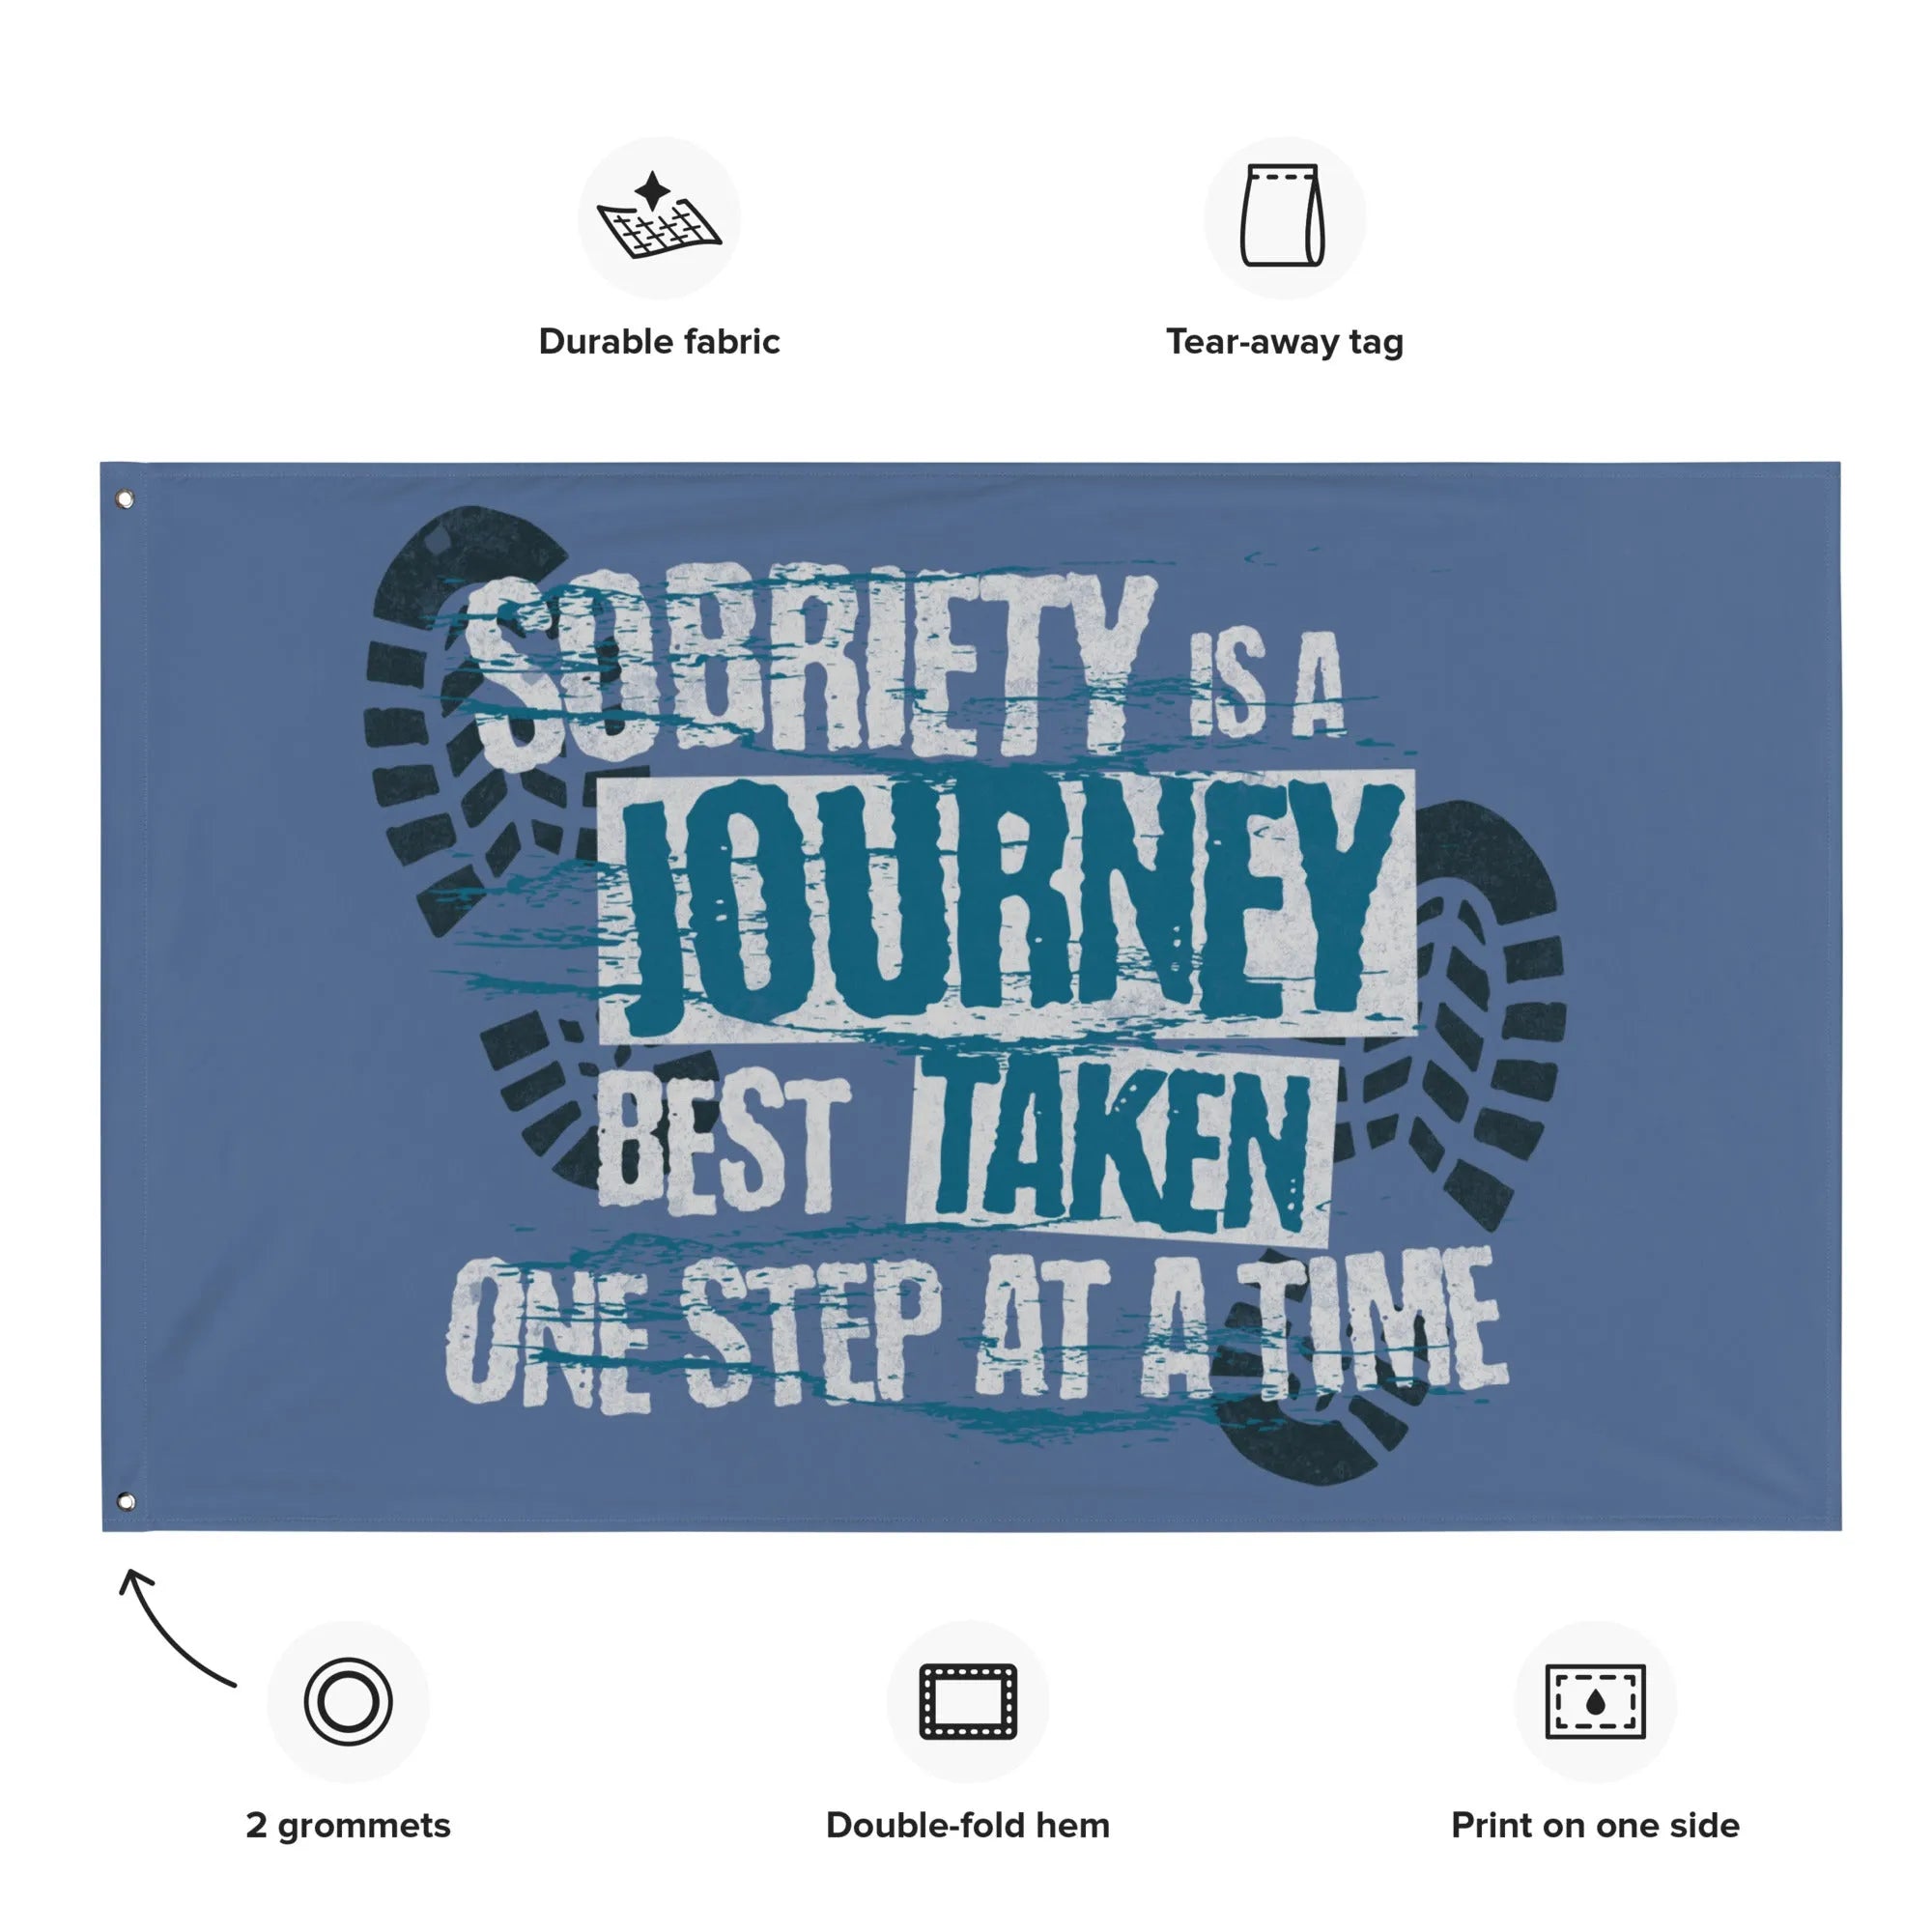 Sobriety Journey Wall Flag: Display Your Commitment to Sobriety at Home - Sobervation